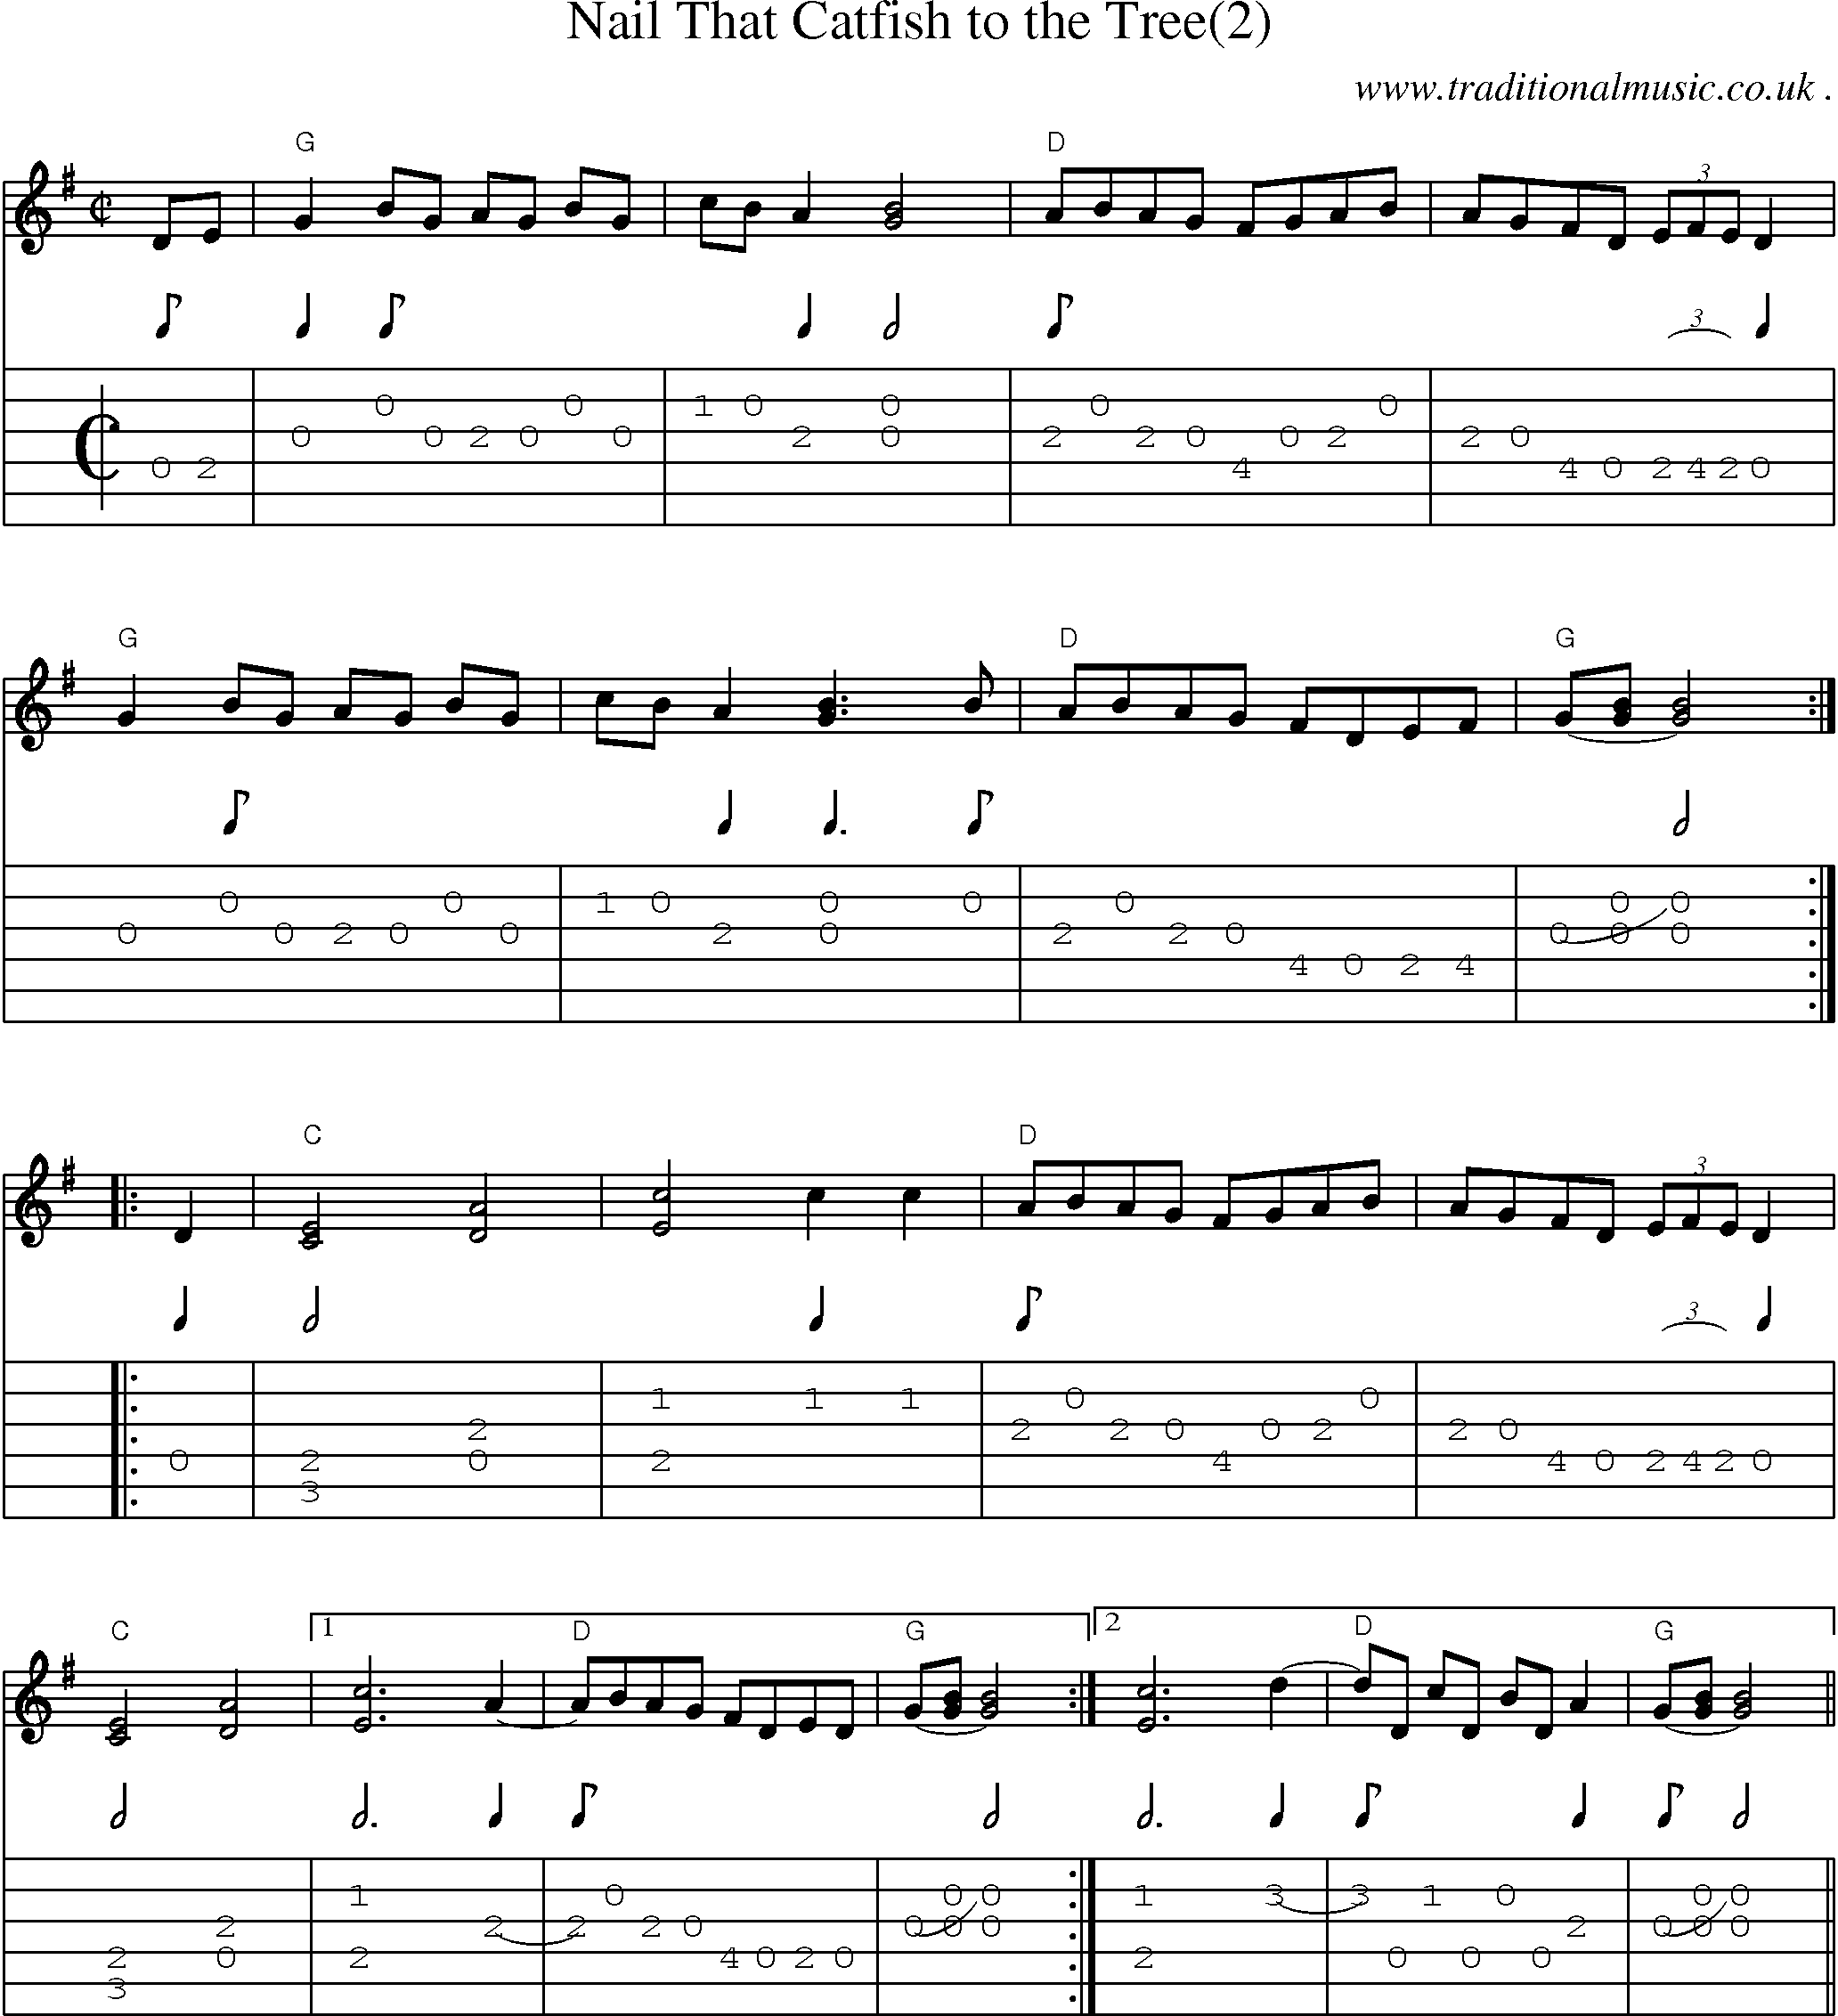 Music Score and Guitar Tabs for Nail That Catfish To The Tree(2)